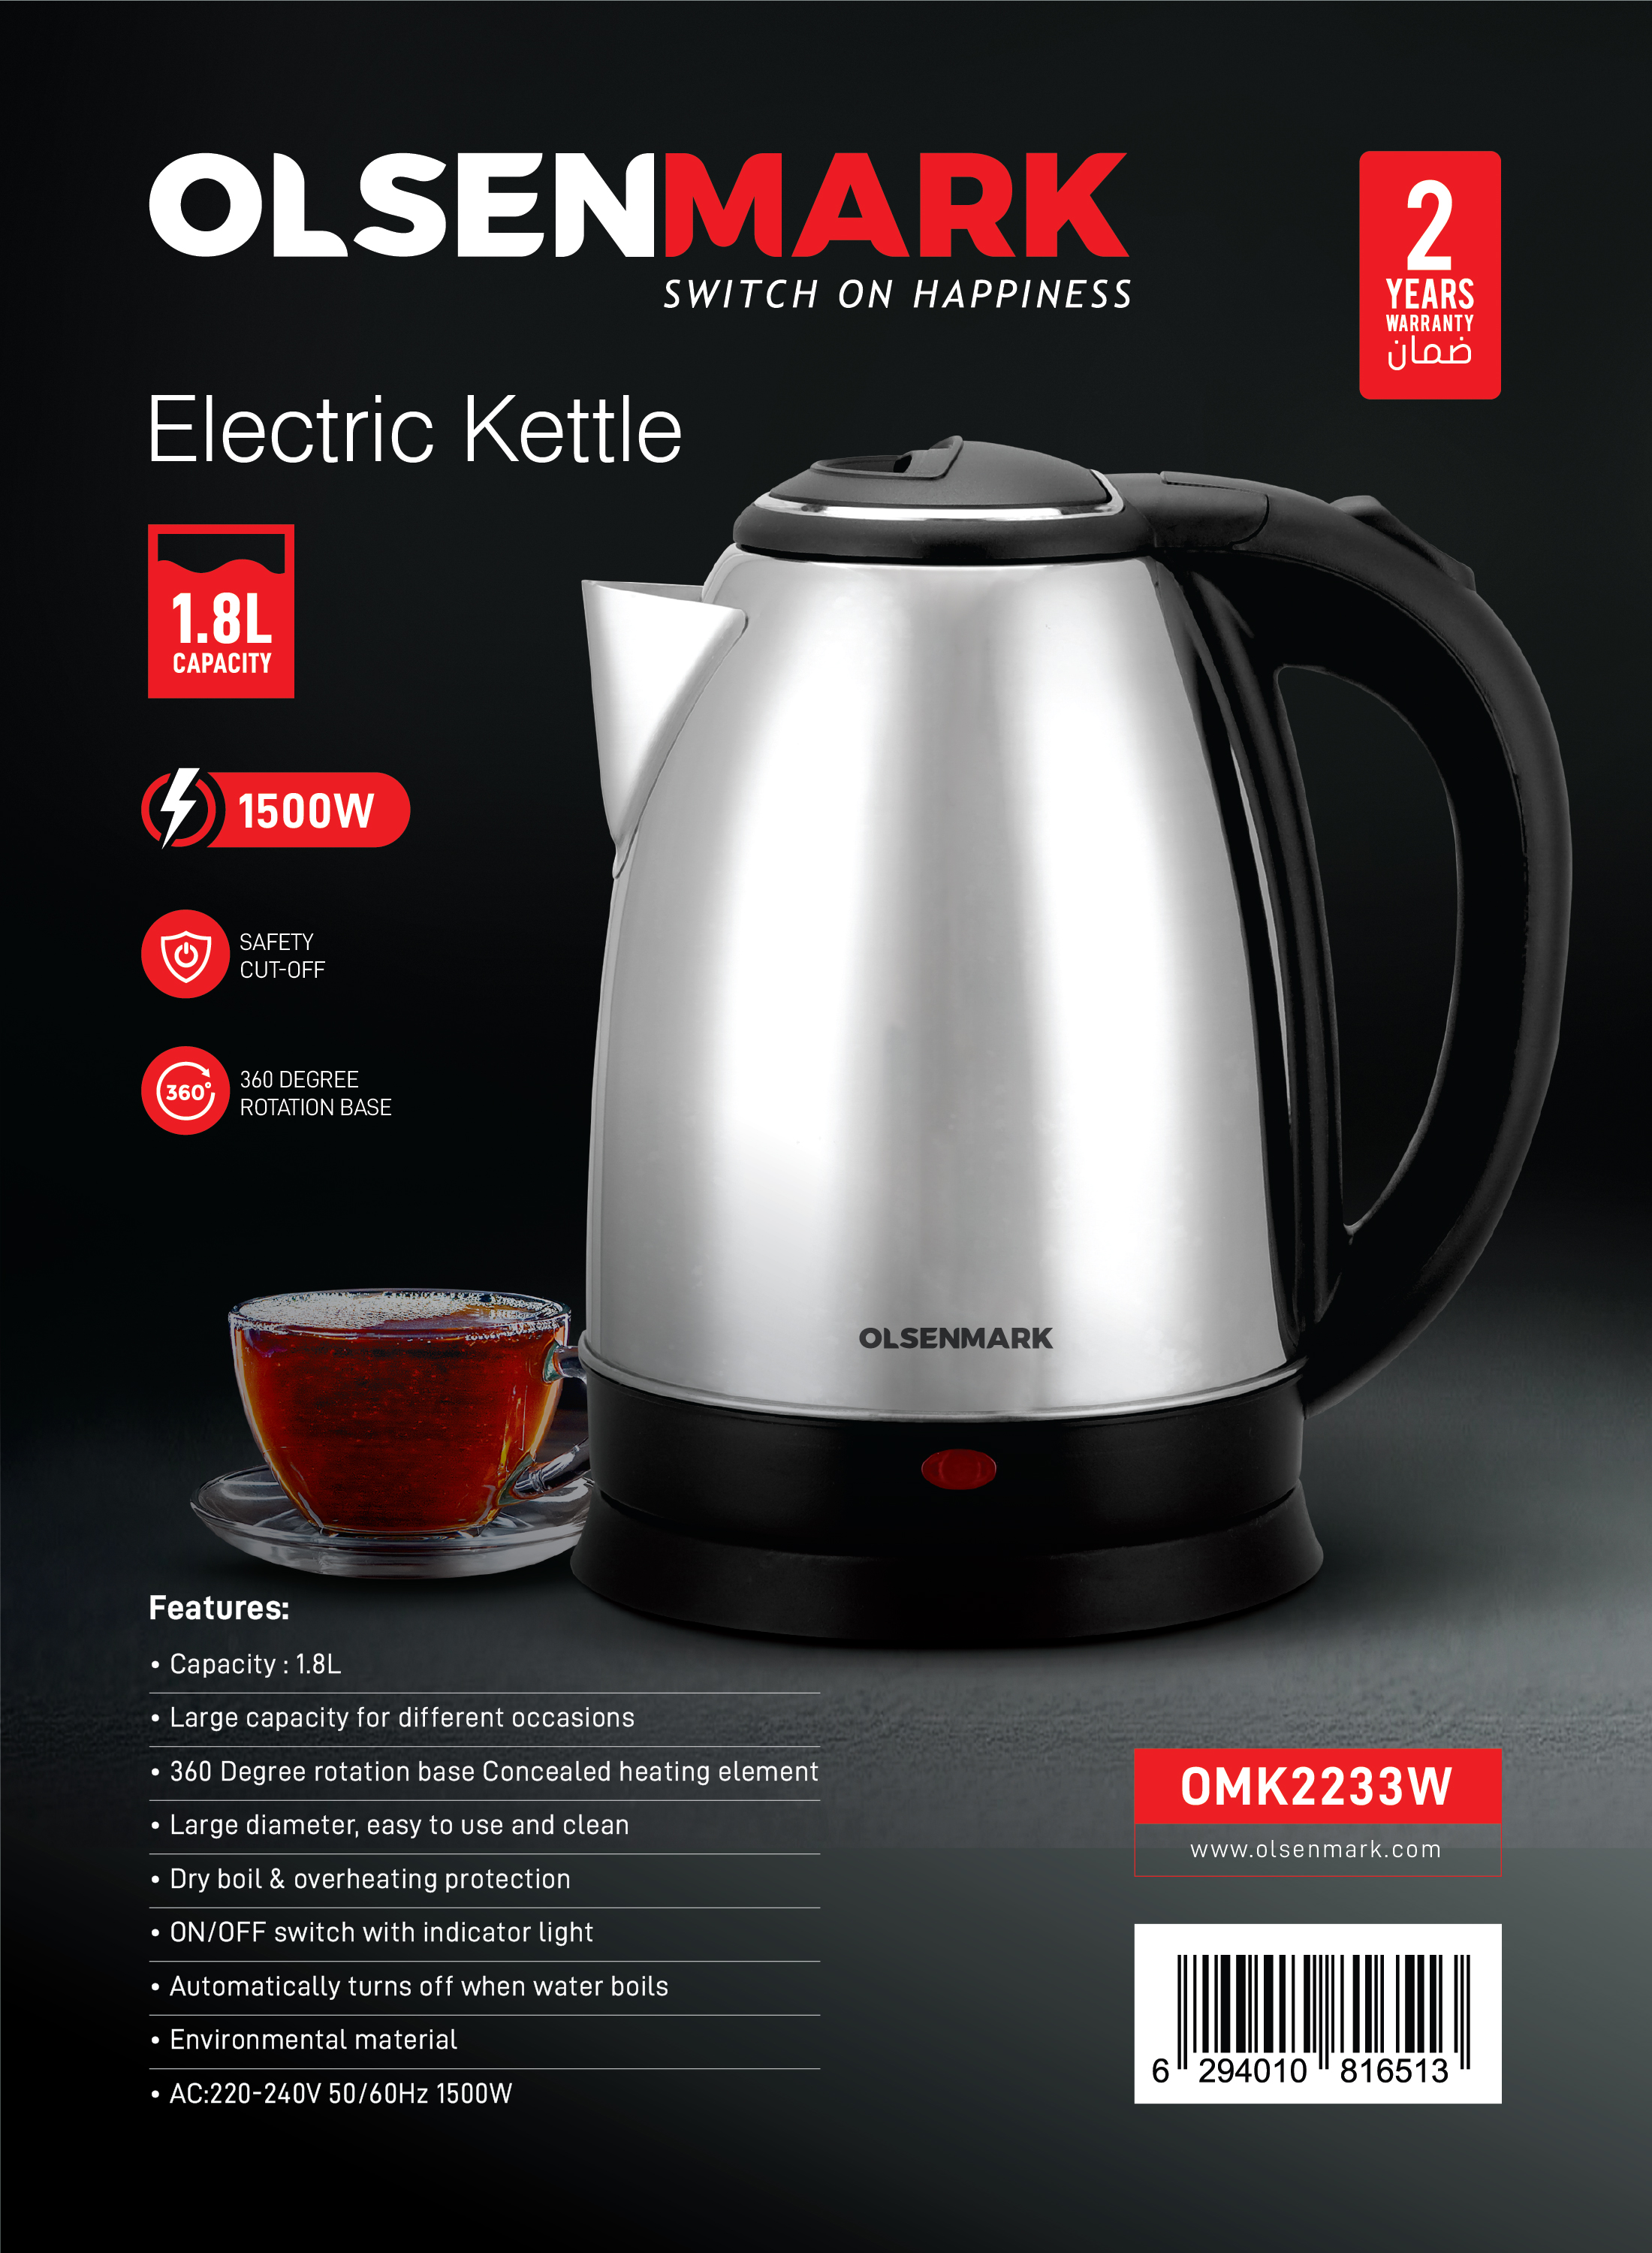 2.5L 1500W Electric Kettle Hot Water Tea Kettle with Temperature